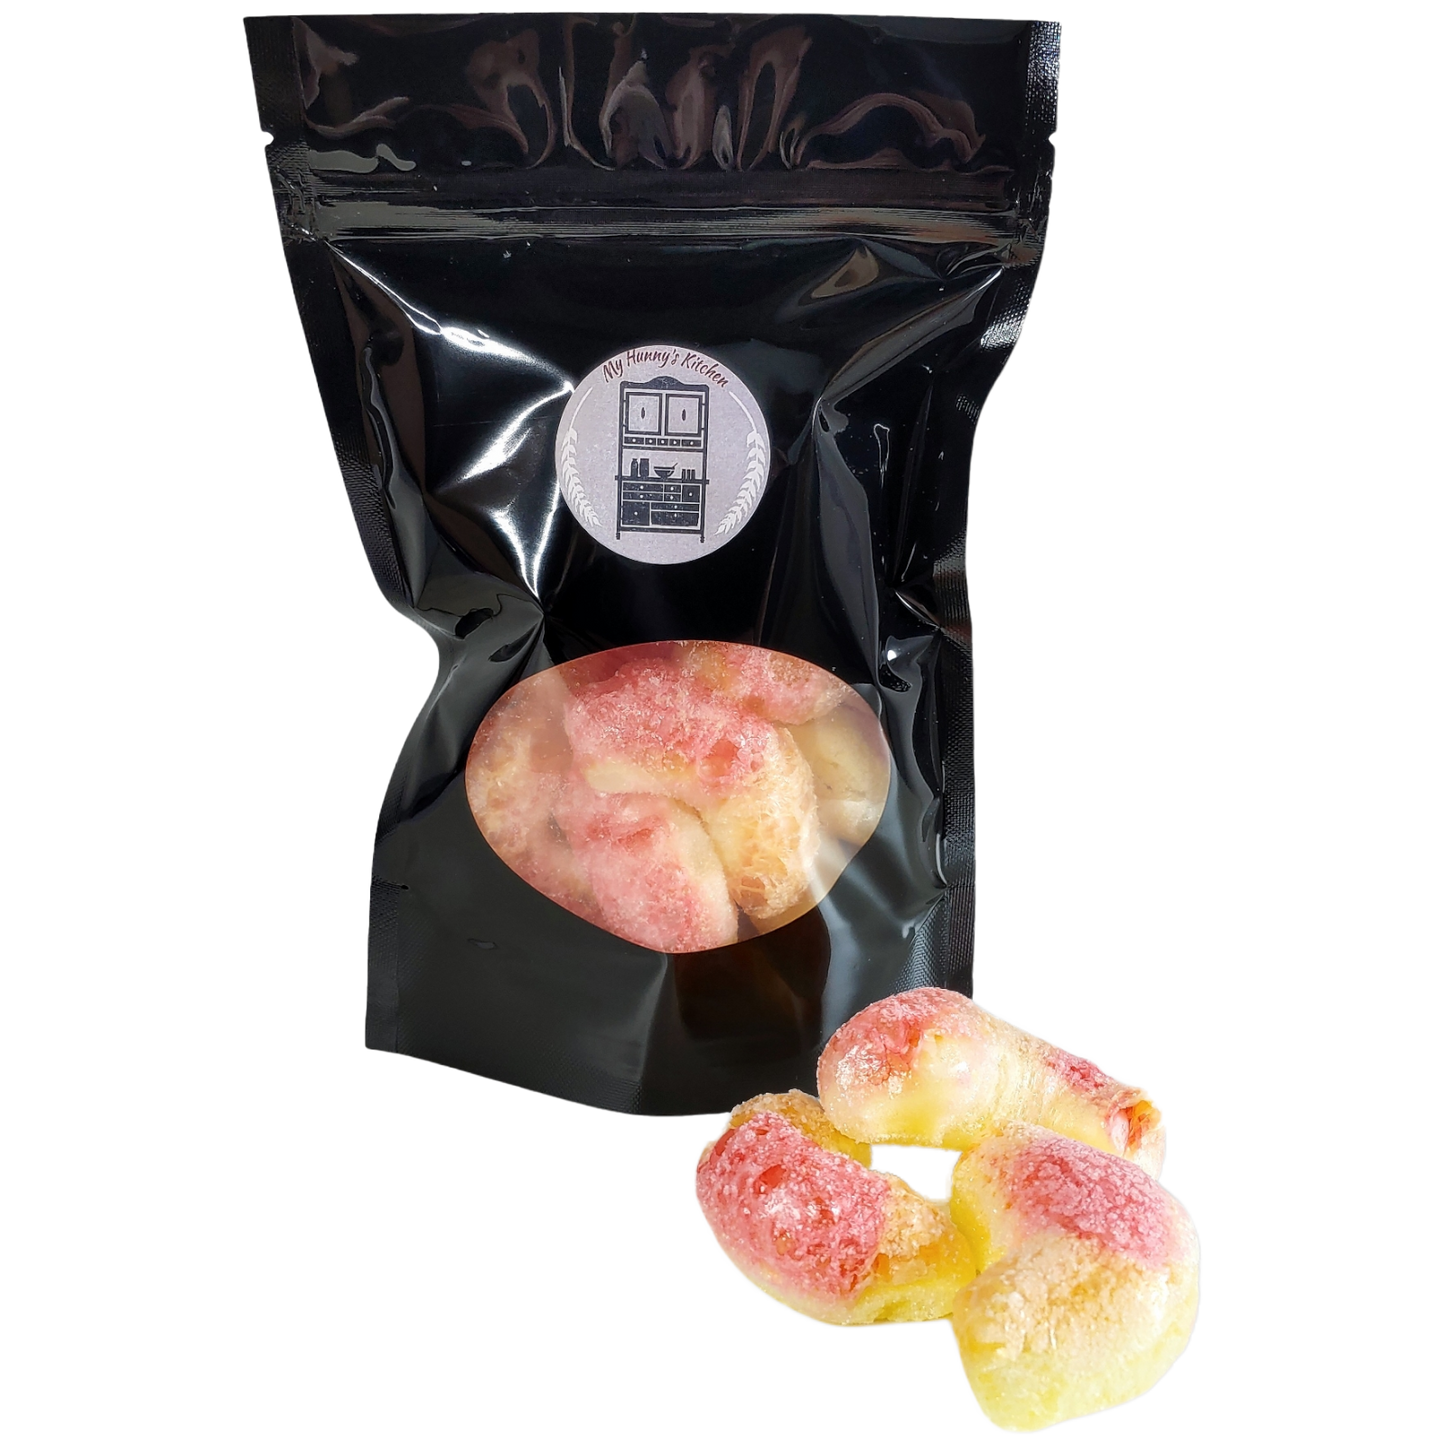 Peach Rings Freeze Dried Candy packaging front view